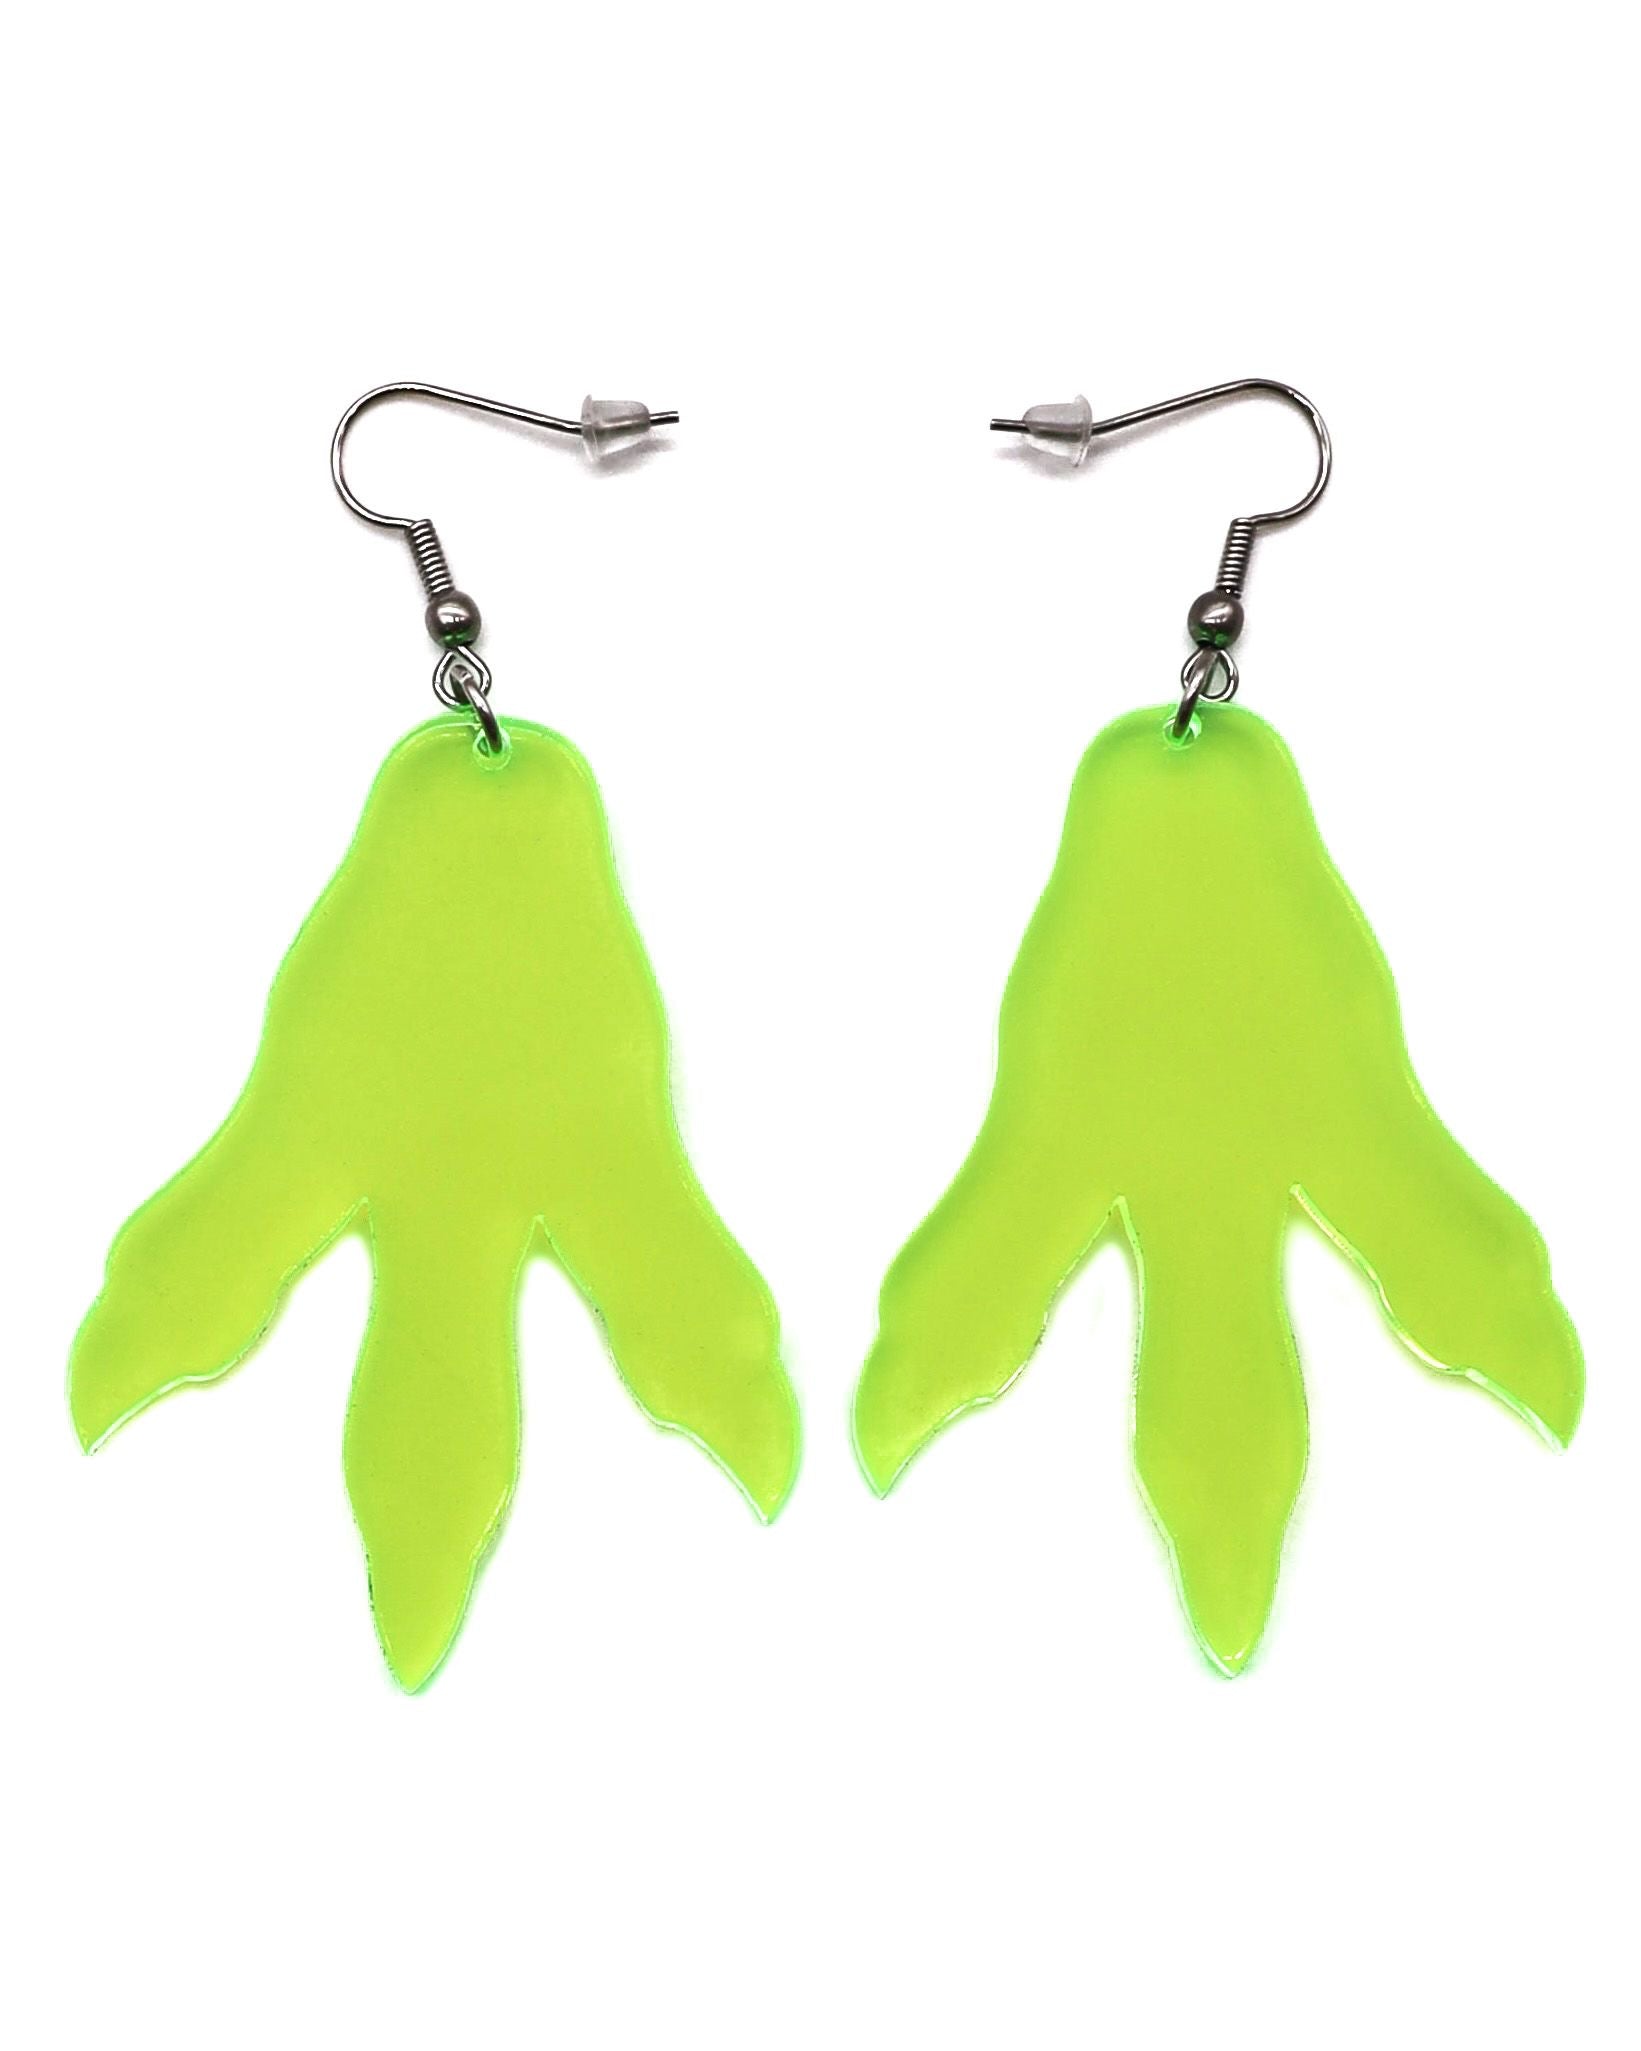 Dino Print Earrings in Fluorescent Green - Vibrant and Playful Rave Accessories